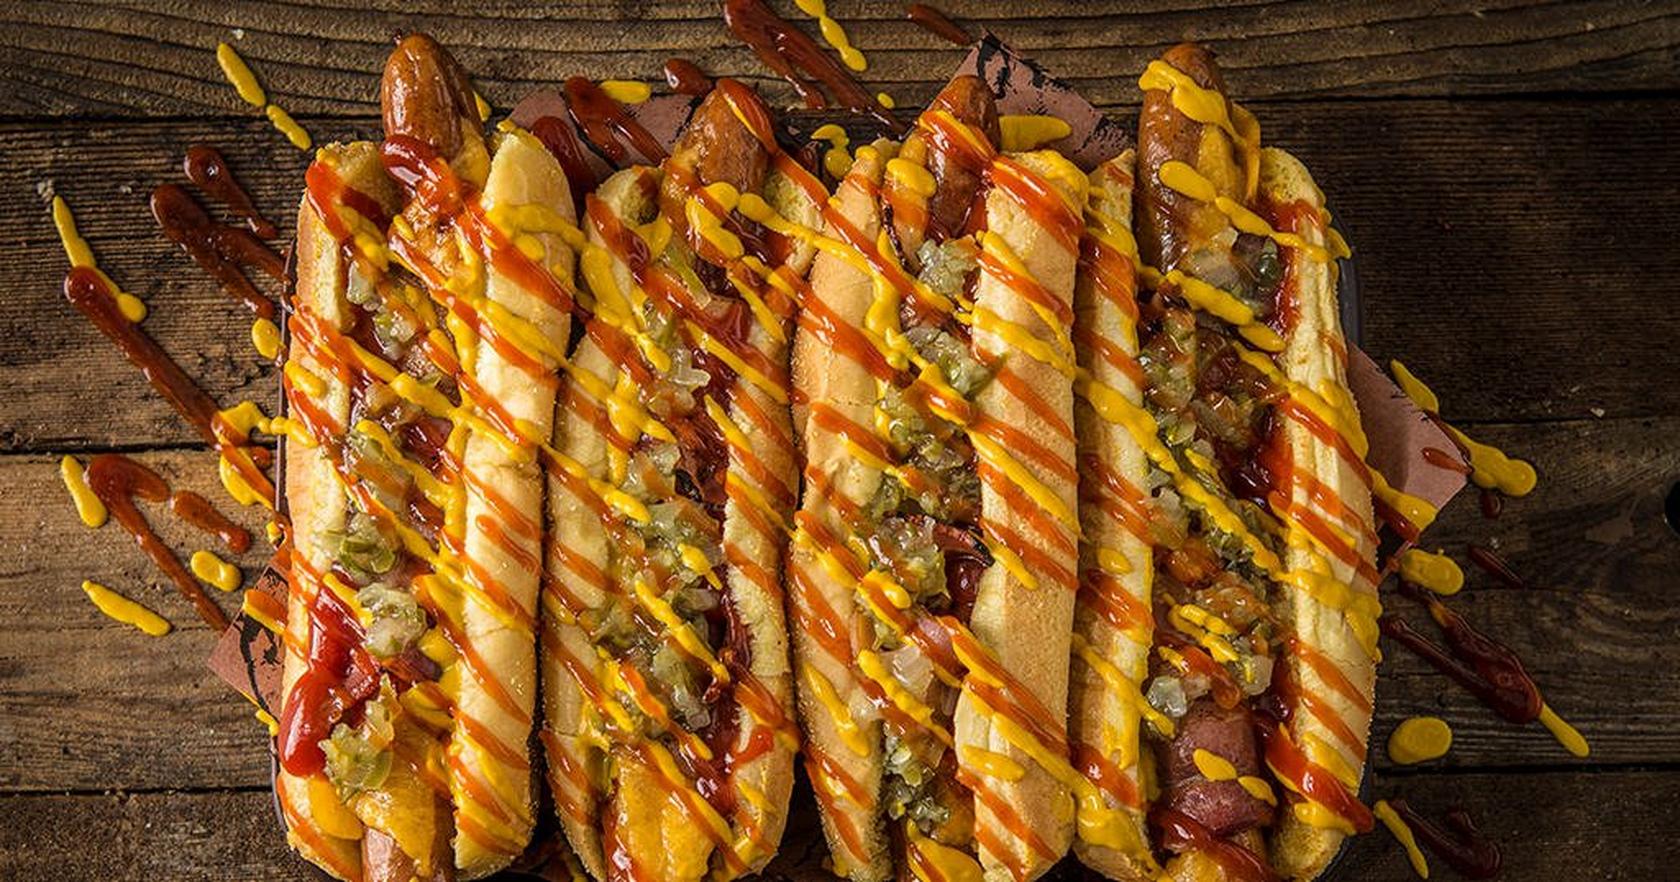 Grilled Bacon-Wrapped Hot Dogs